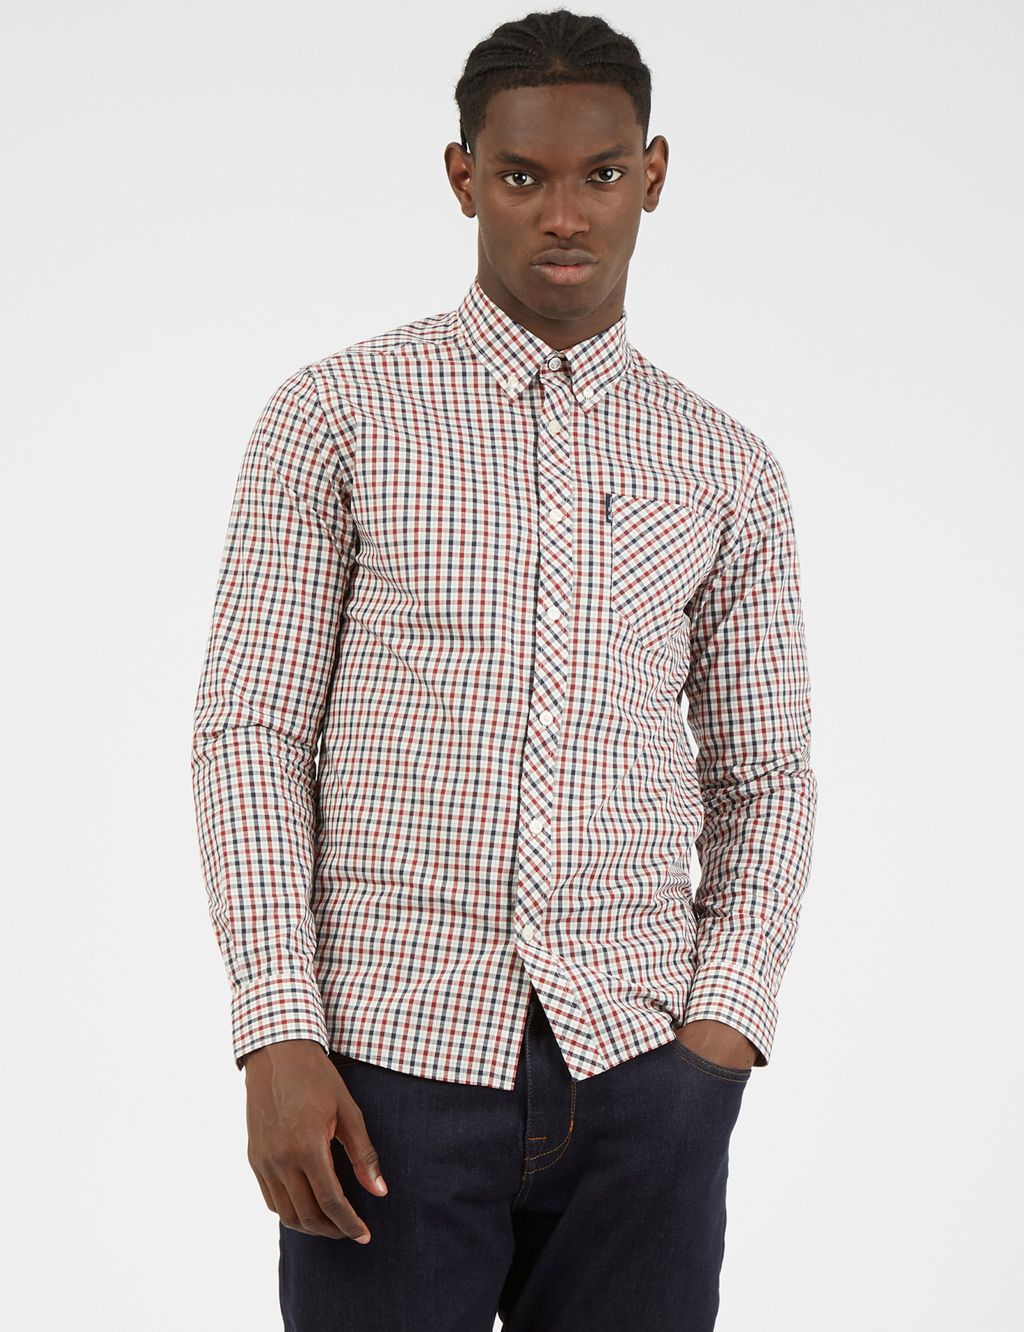 Regular Fit Pure Cotton Gingham Oxford Shirt image 1